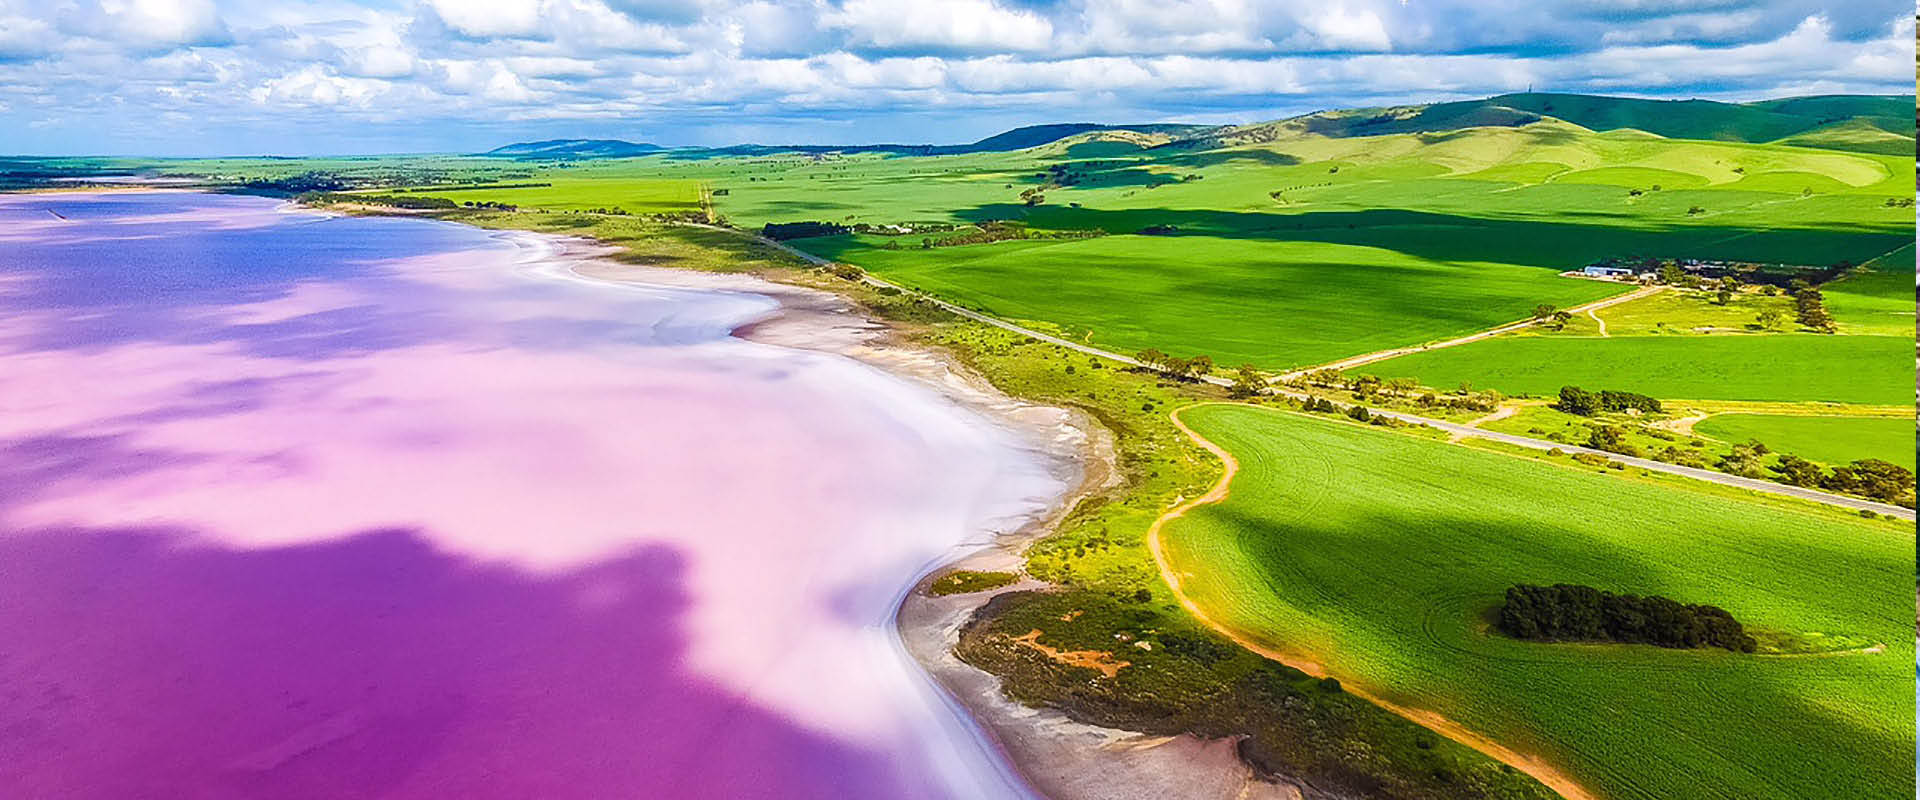 Pink lakes in Australia and New Zealand: Nine spectacular lakes to visit